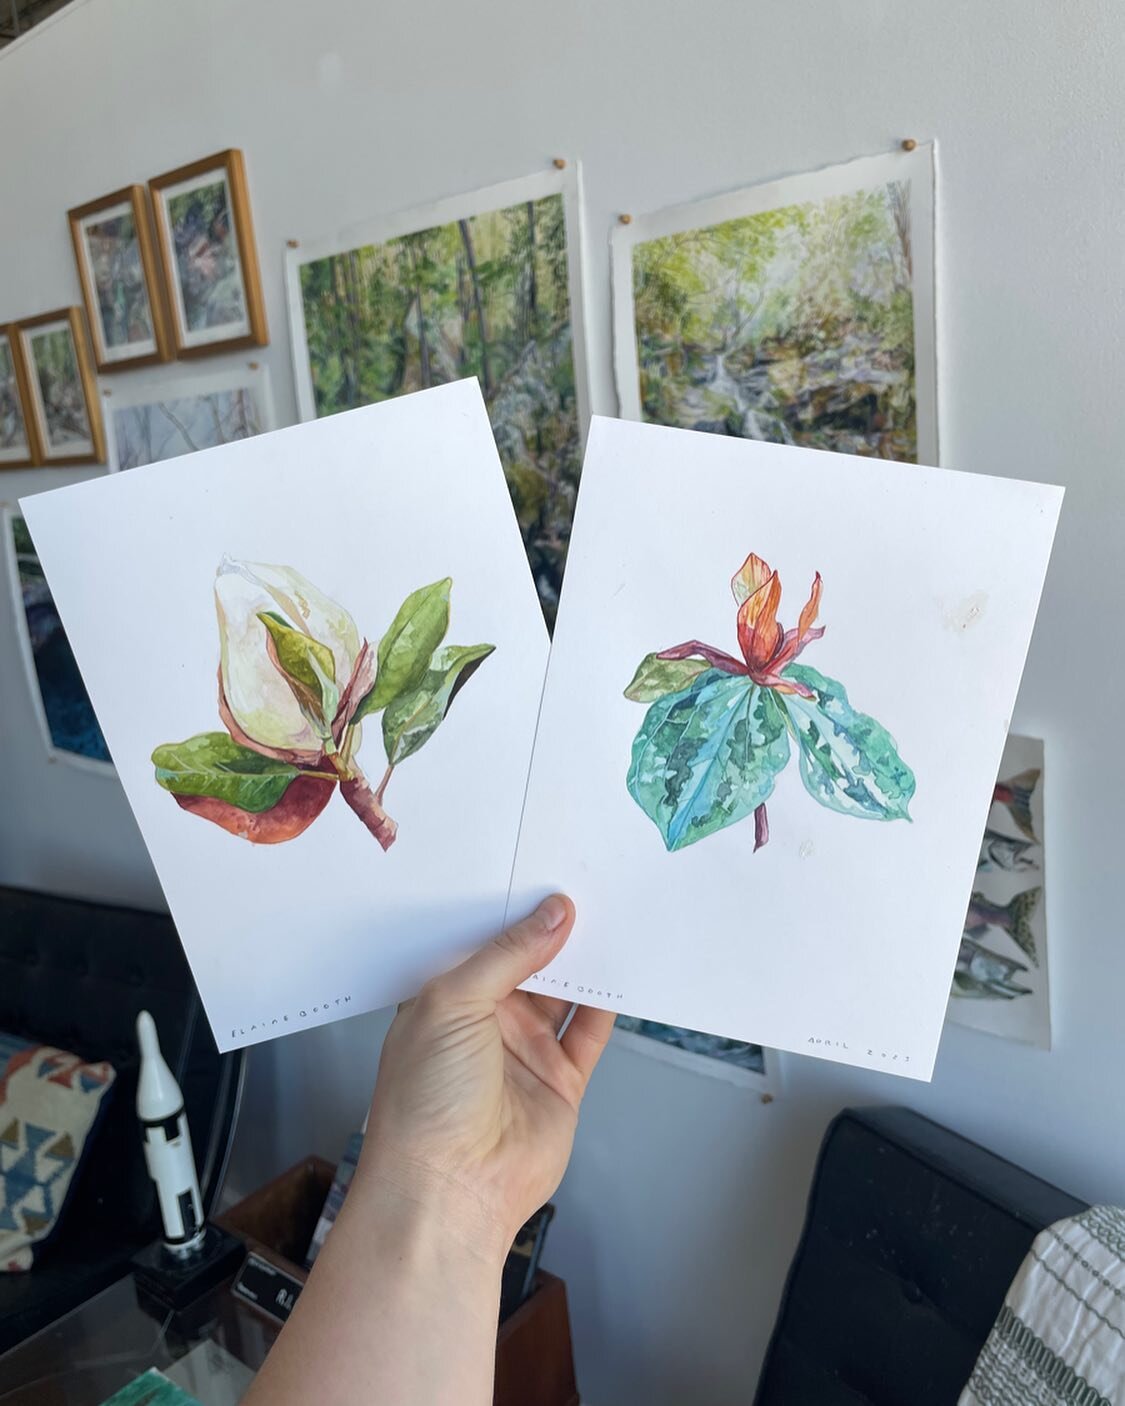 wildflowers for spring. making 10 of them for now, could be more... these two are available for claiming! ✨you can pick up saturday in the studio @lowemillarts 
trillium is sold!